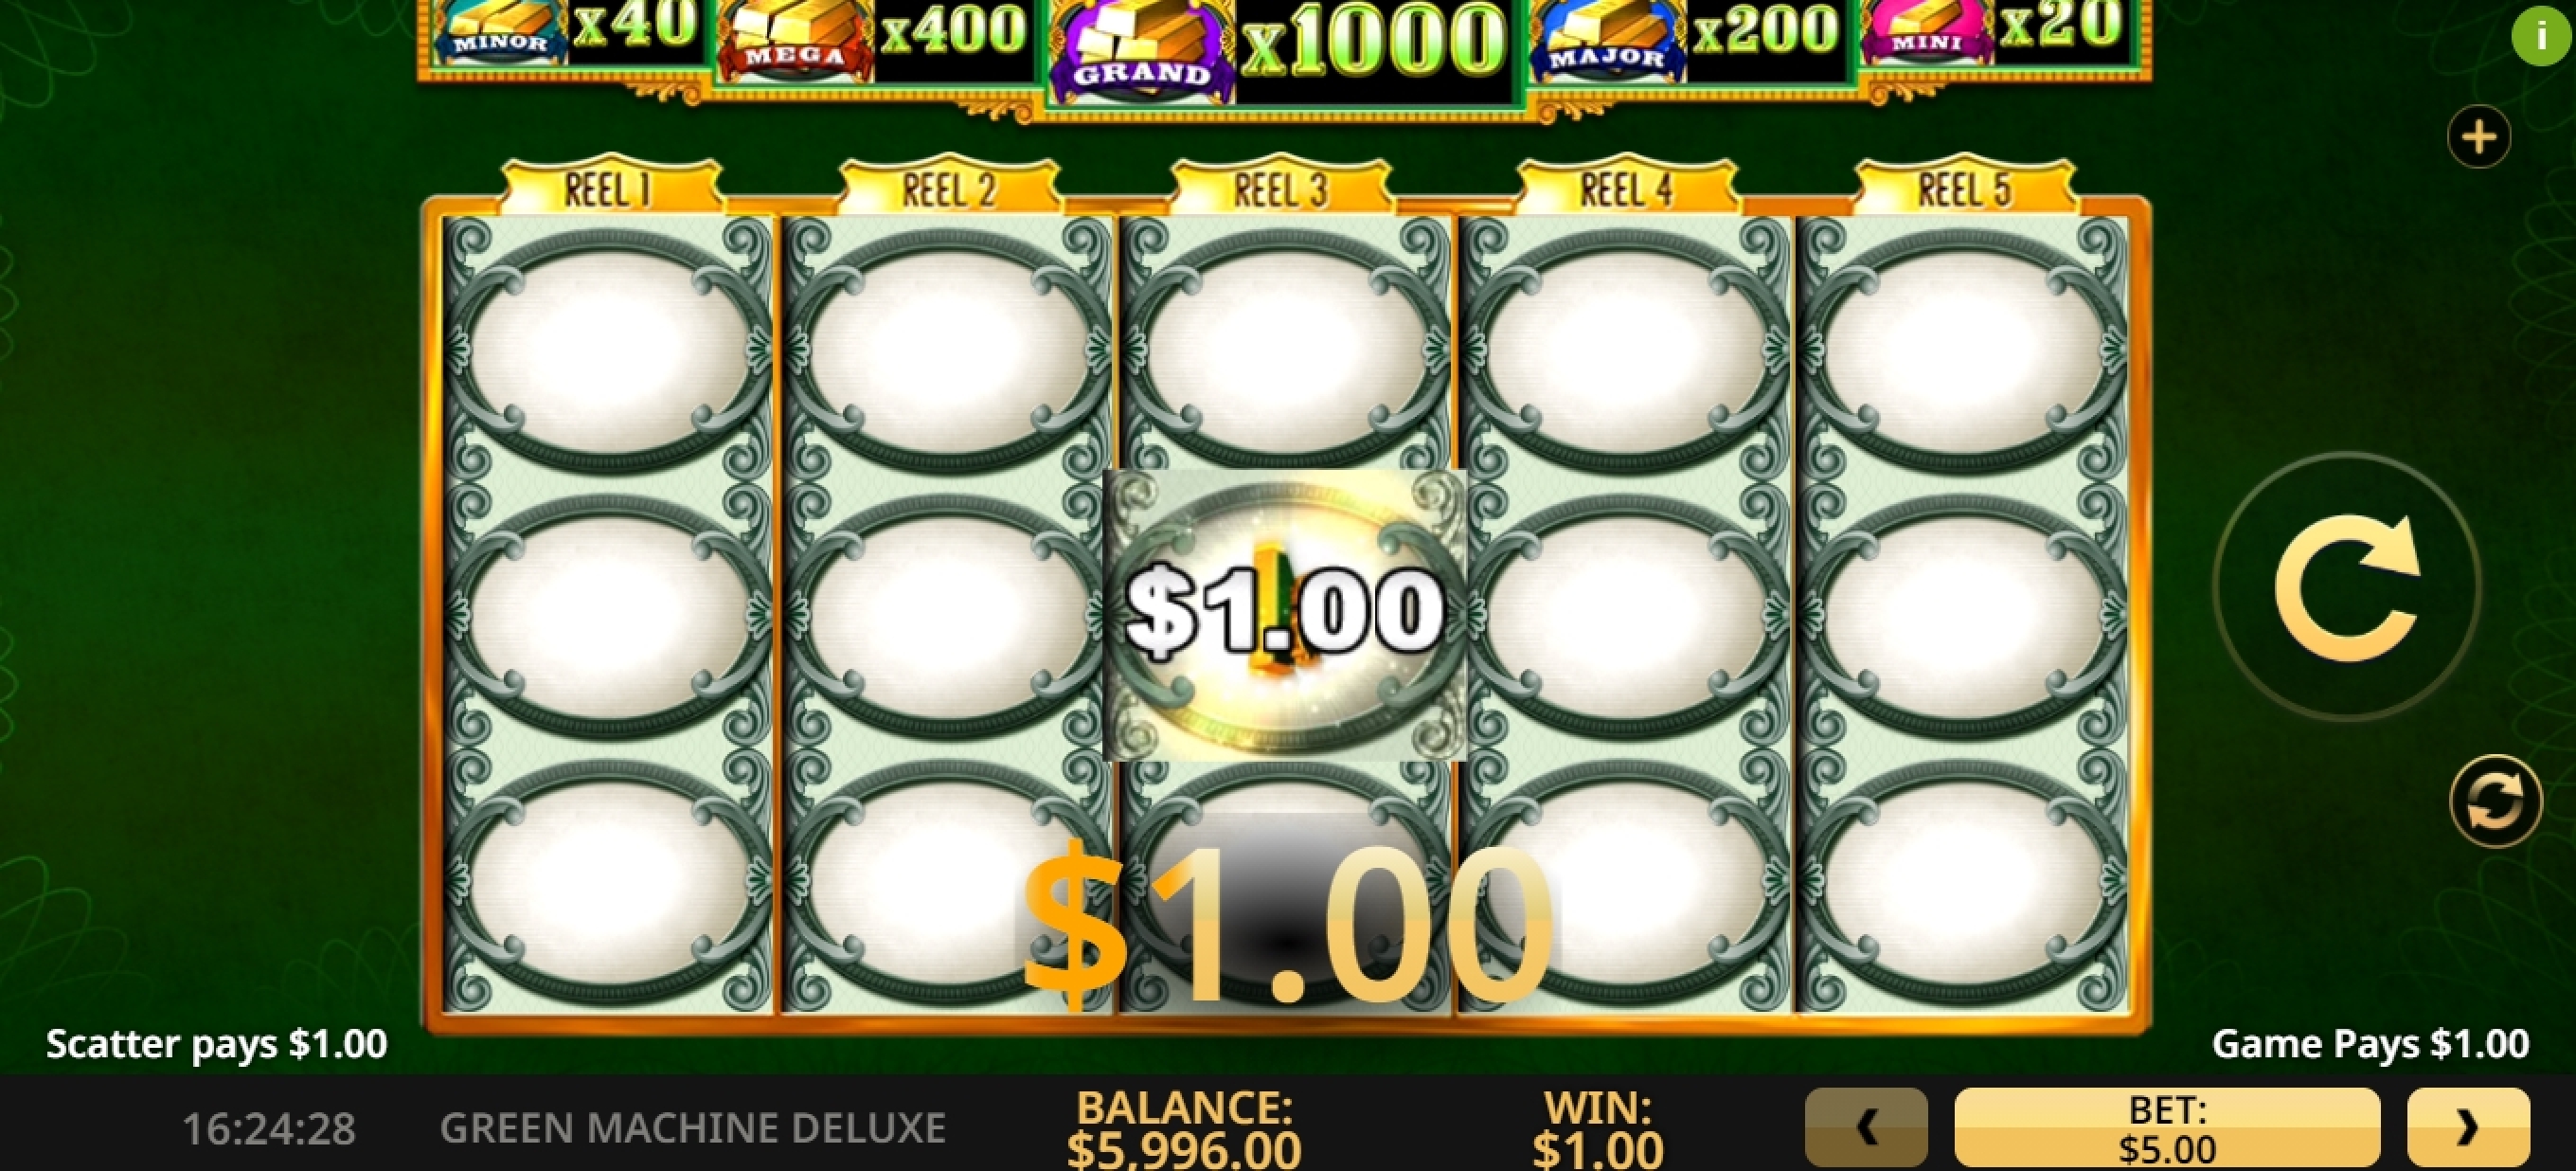 Win Money in The Green Machine Deluxe Free Slot Game by High 5 Games